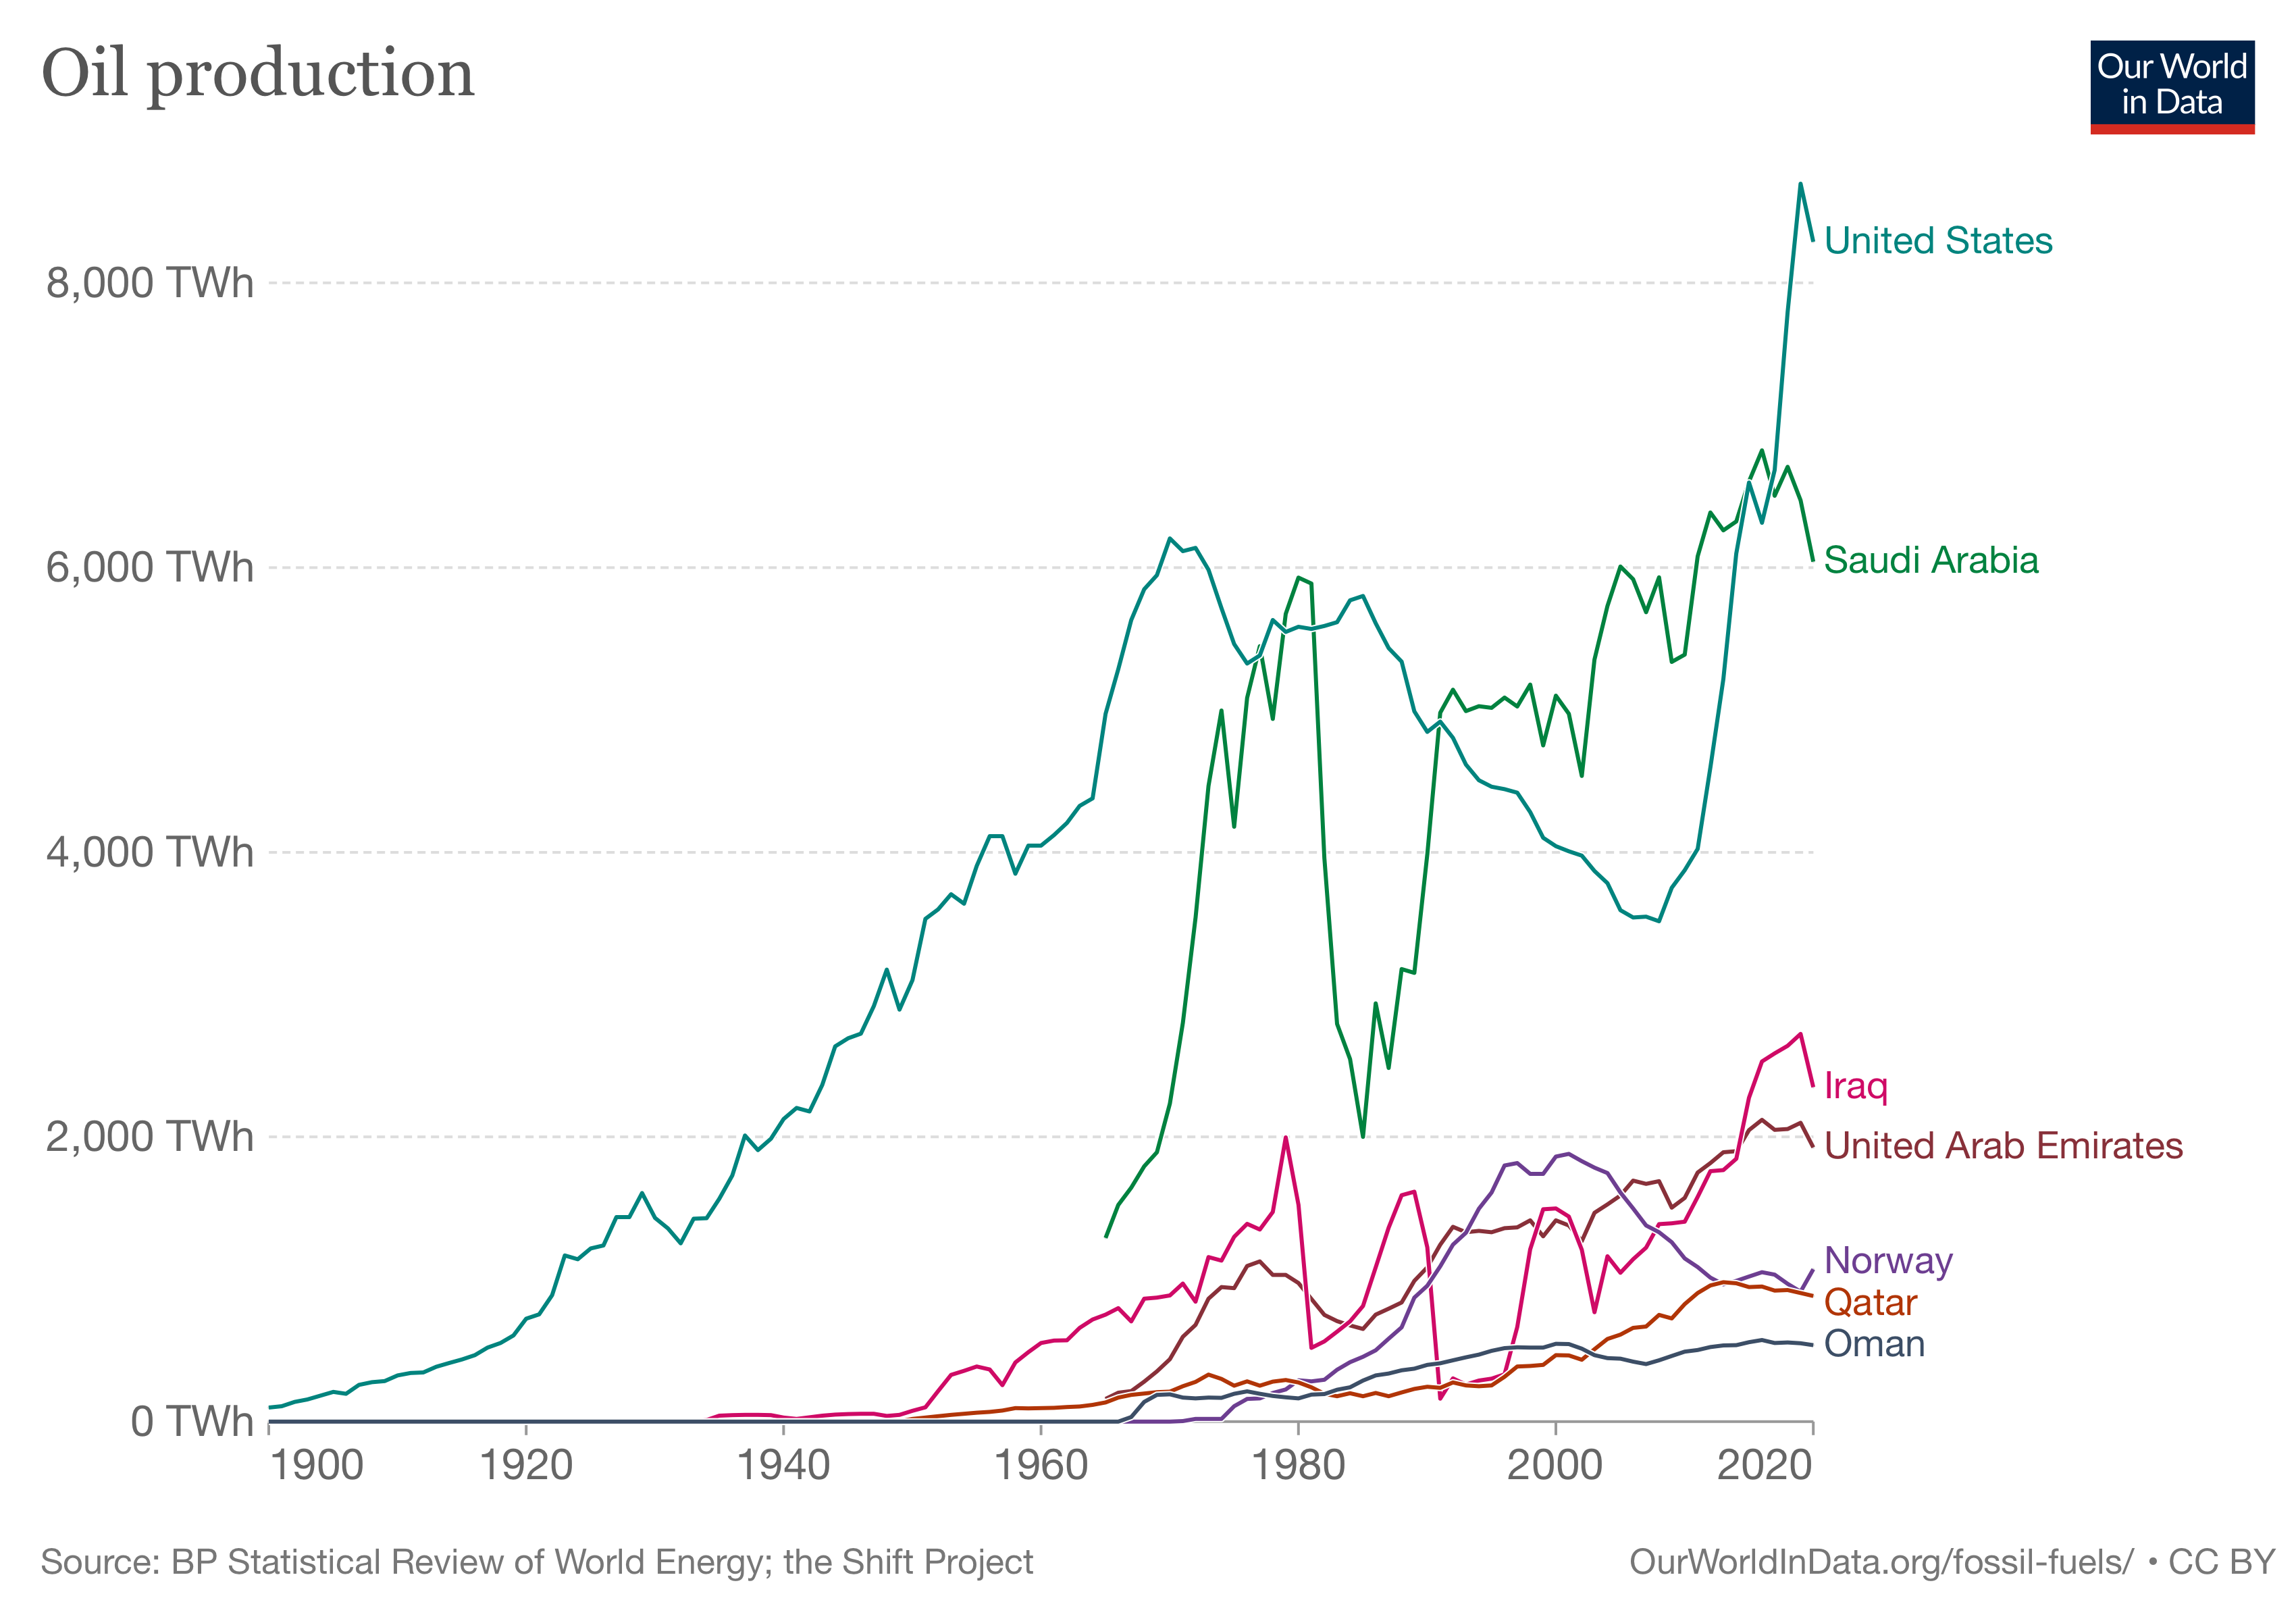 Historical oil production rates